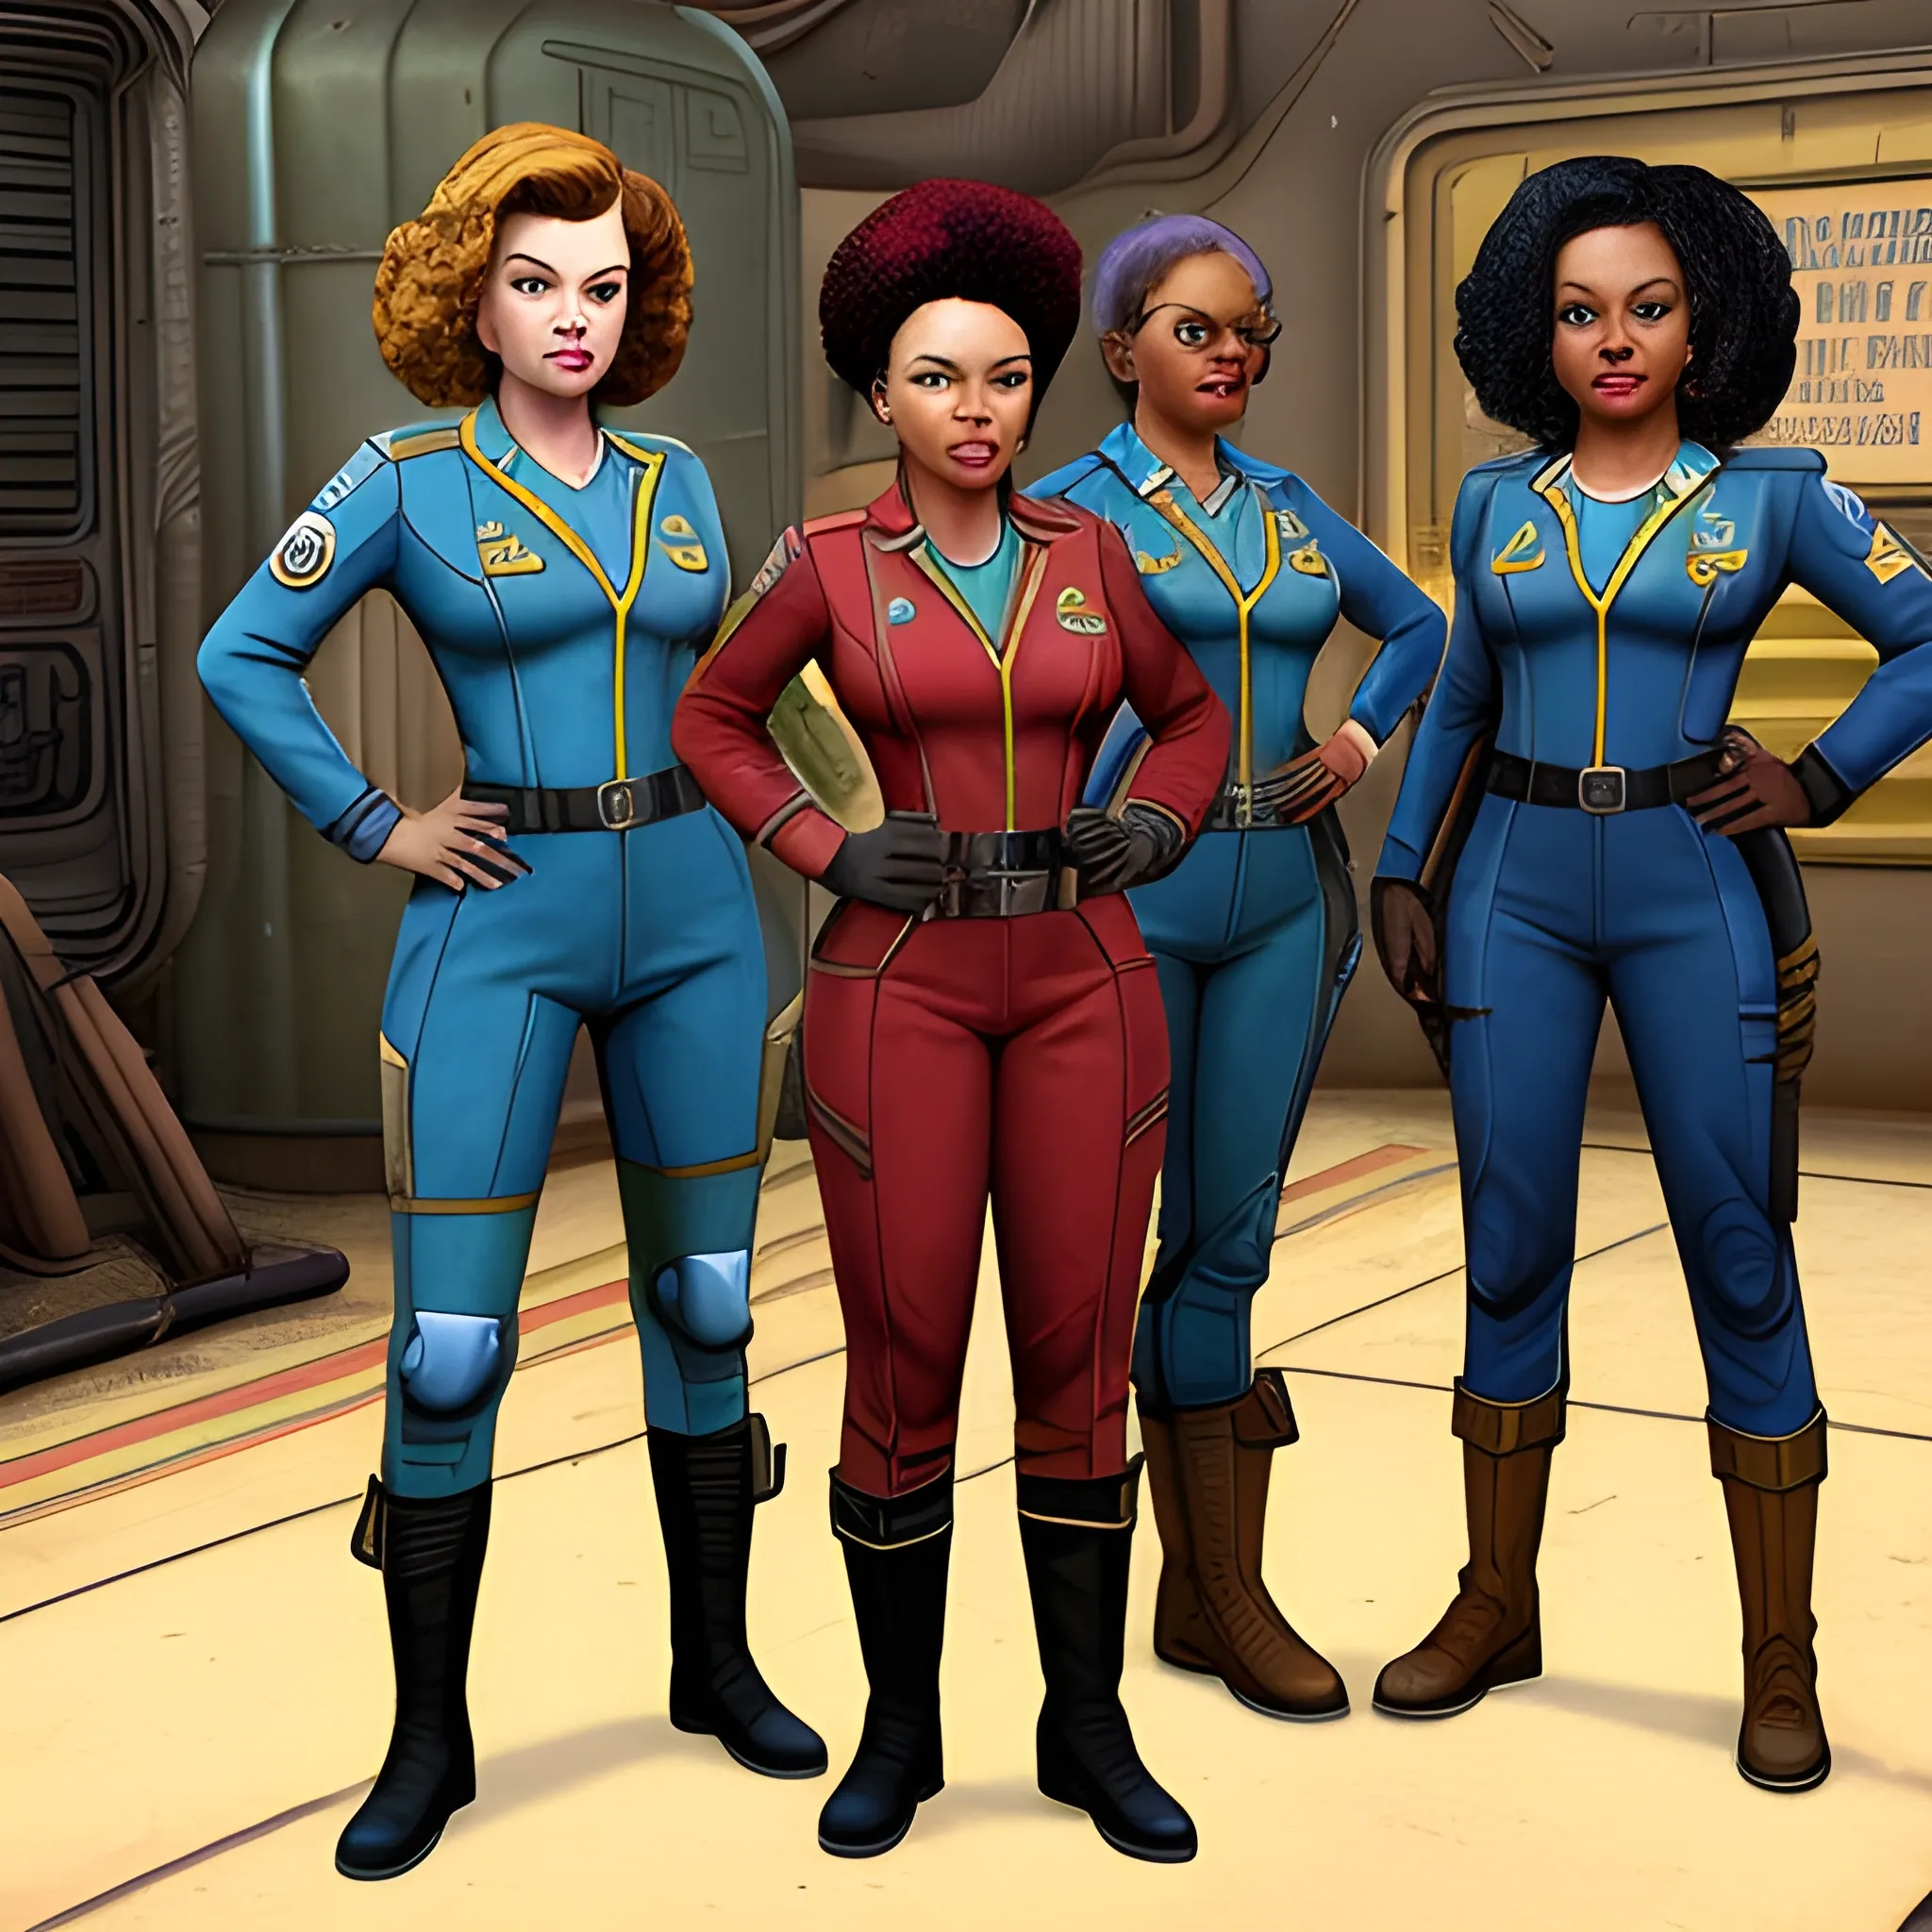 In the style of Fallout New Vegas, masterpiece, group of( Yvette Nicole Brown, Allion brie, and Gillian Jacobs) as vault dwellers in blue vault suit